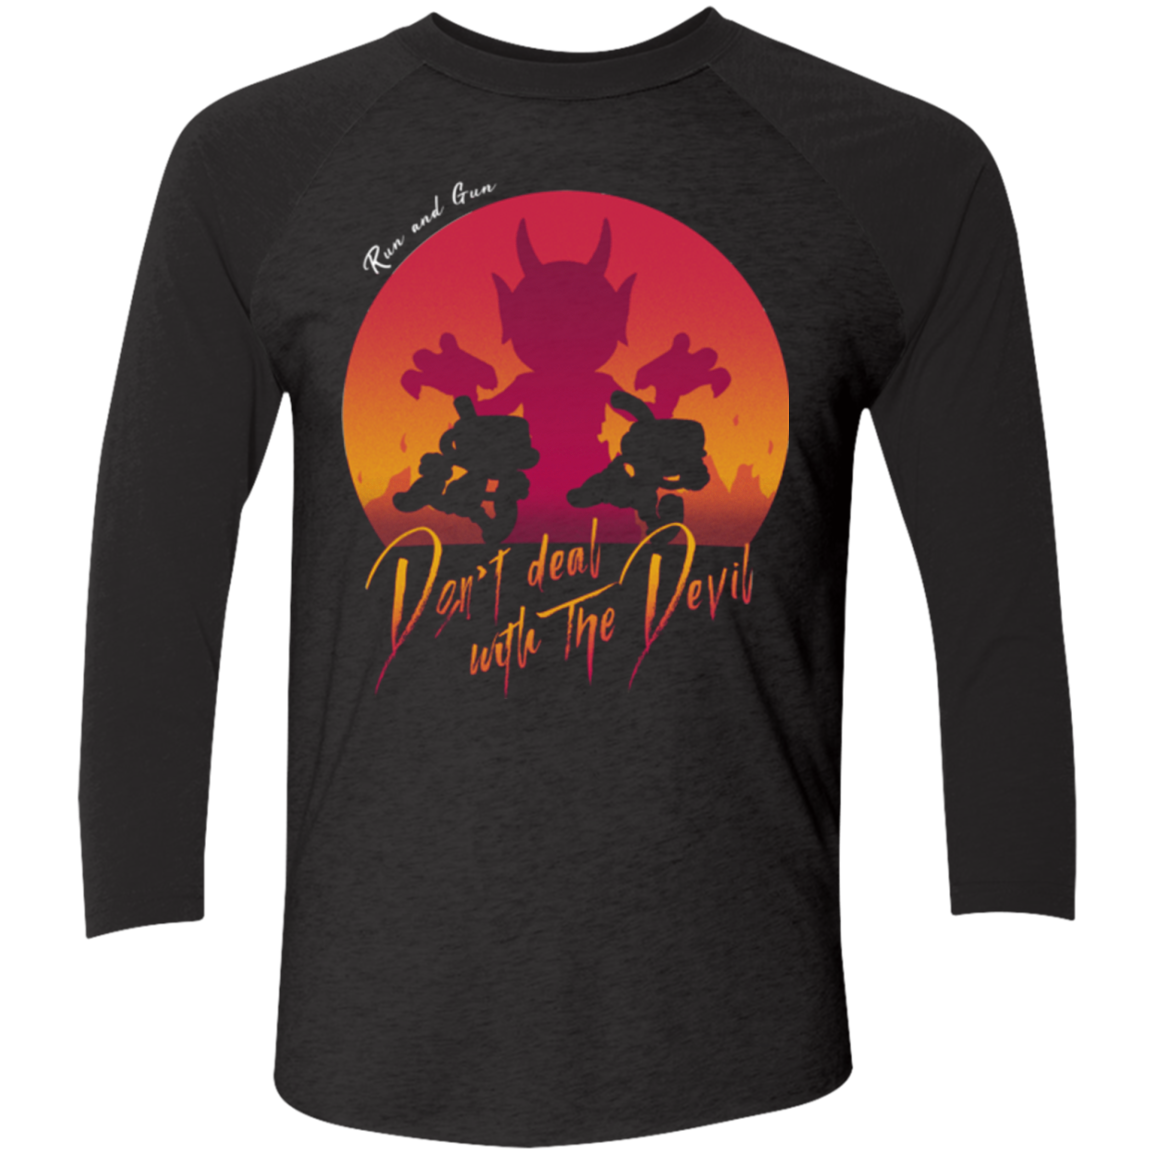 Don't deal with the Devil Men's Triblend 3/4 Sleeve